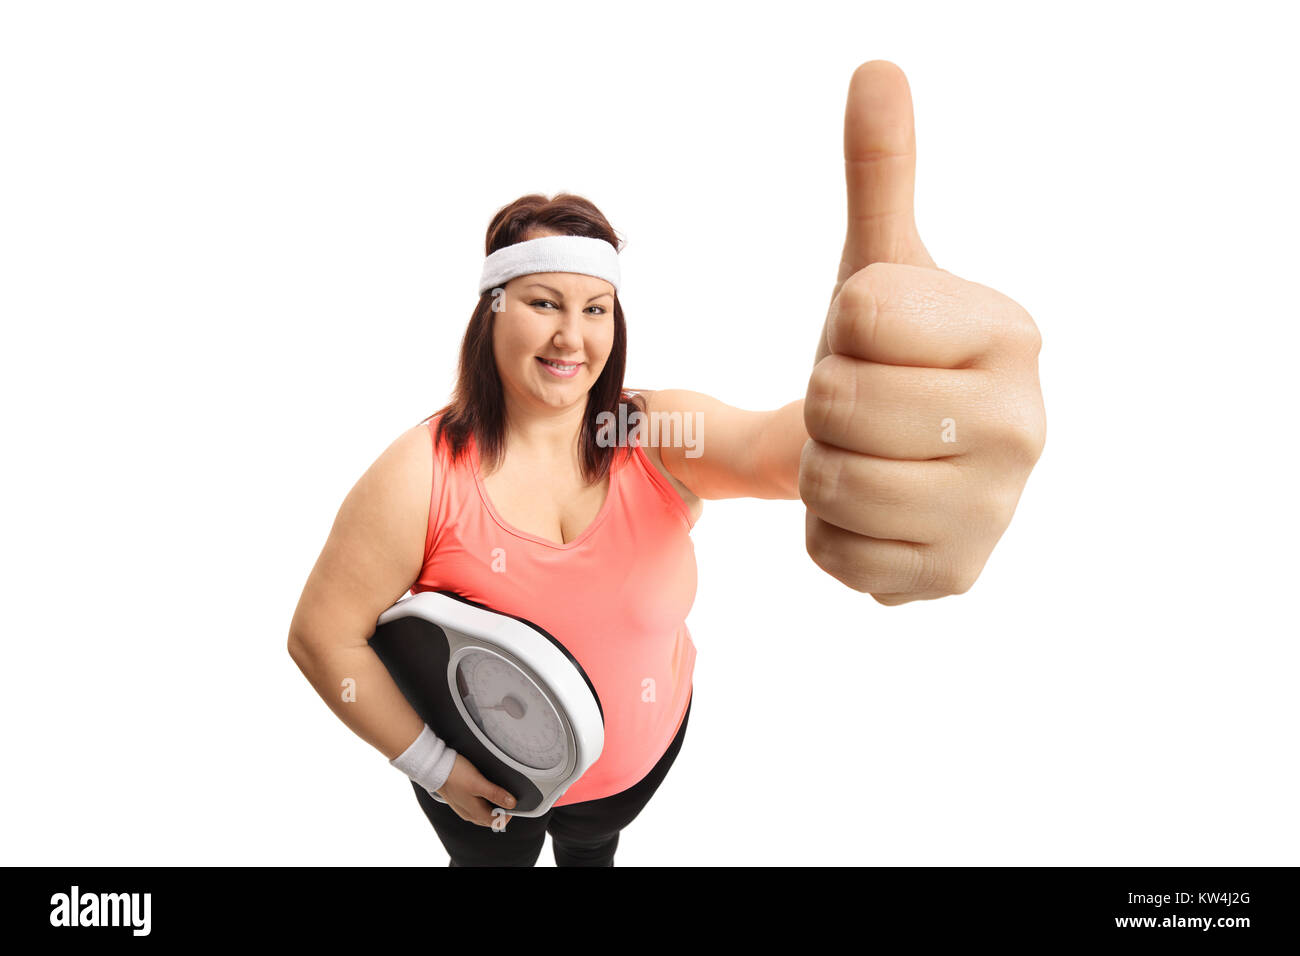 Overweight woman with a weight scale making a thumb up gesture isolated on white background Stock Photo